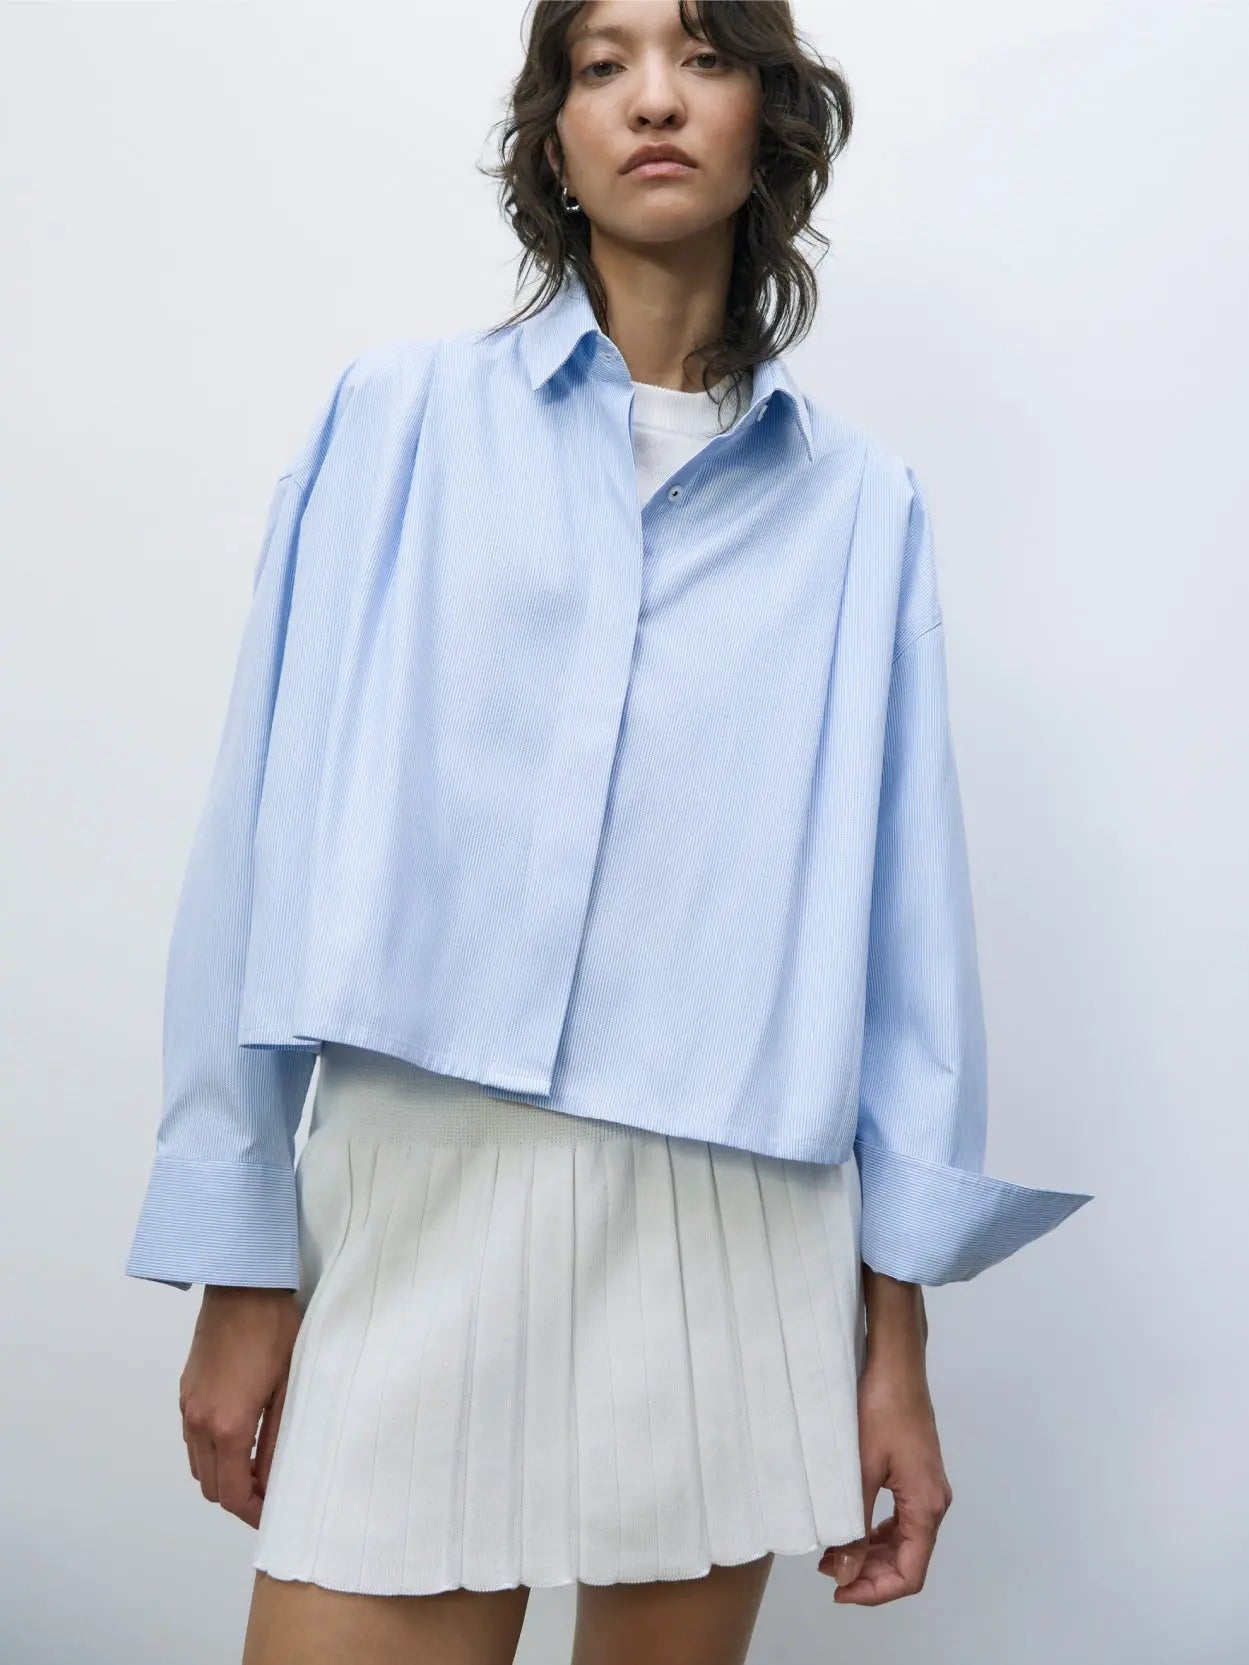 A Cotton Pleated Skirt White by Cordera, showcased against a plain light gray background, features a fitted waistband and multiple sharp pleats creating a structured and stylish look. Find this chic piece at Bassalstore in Barcelona.